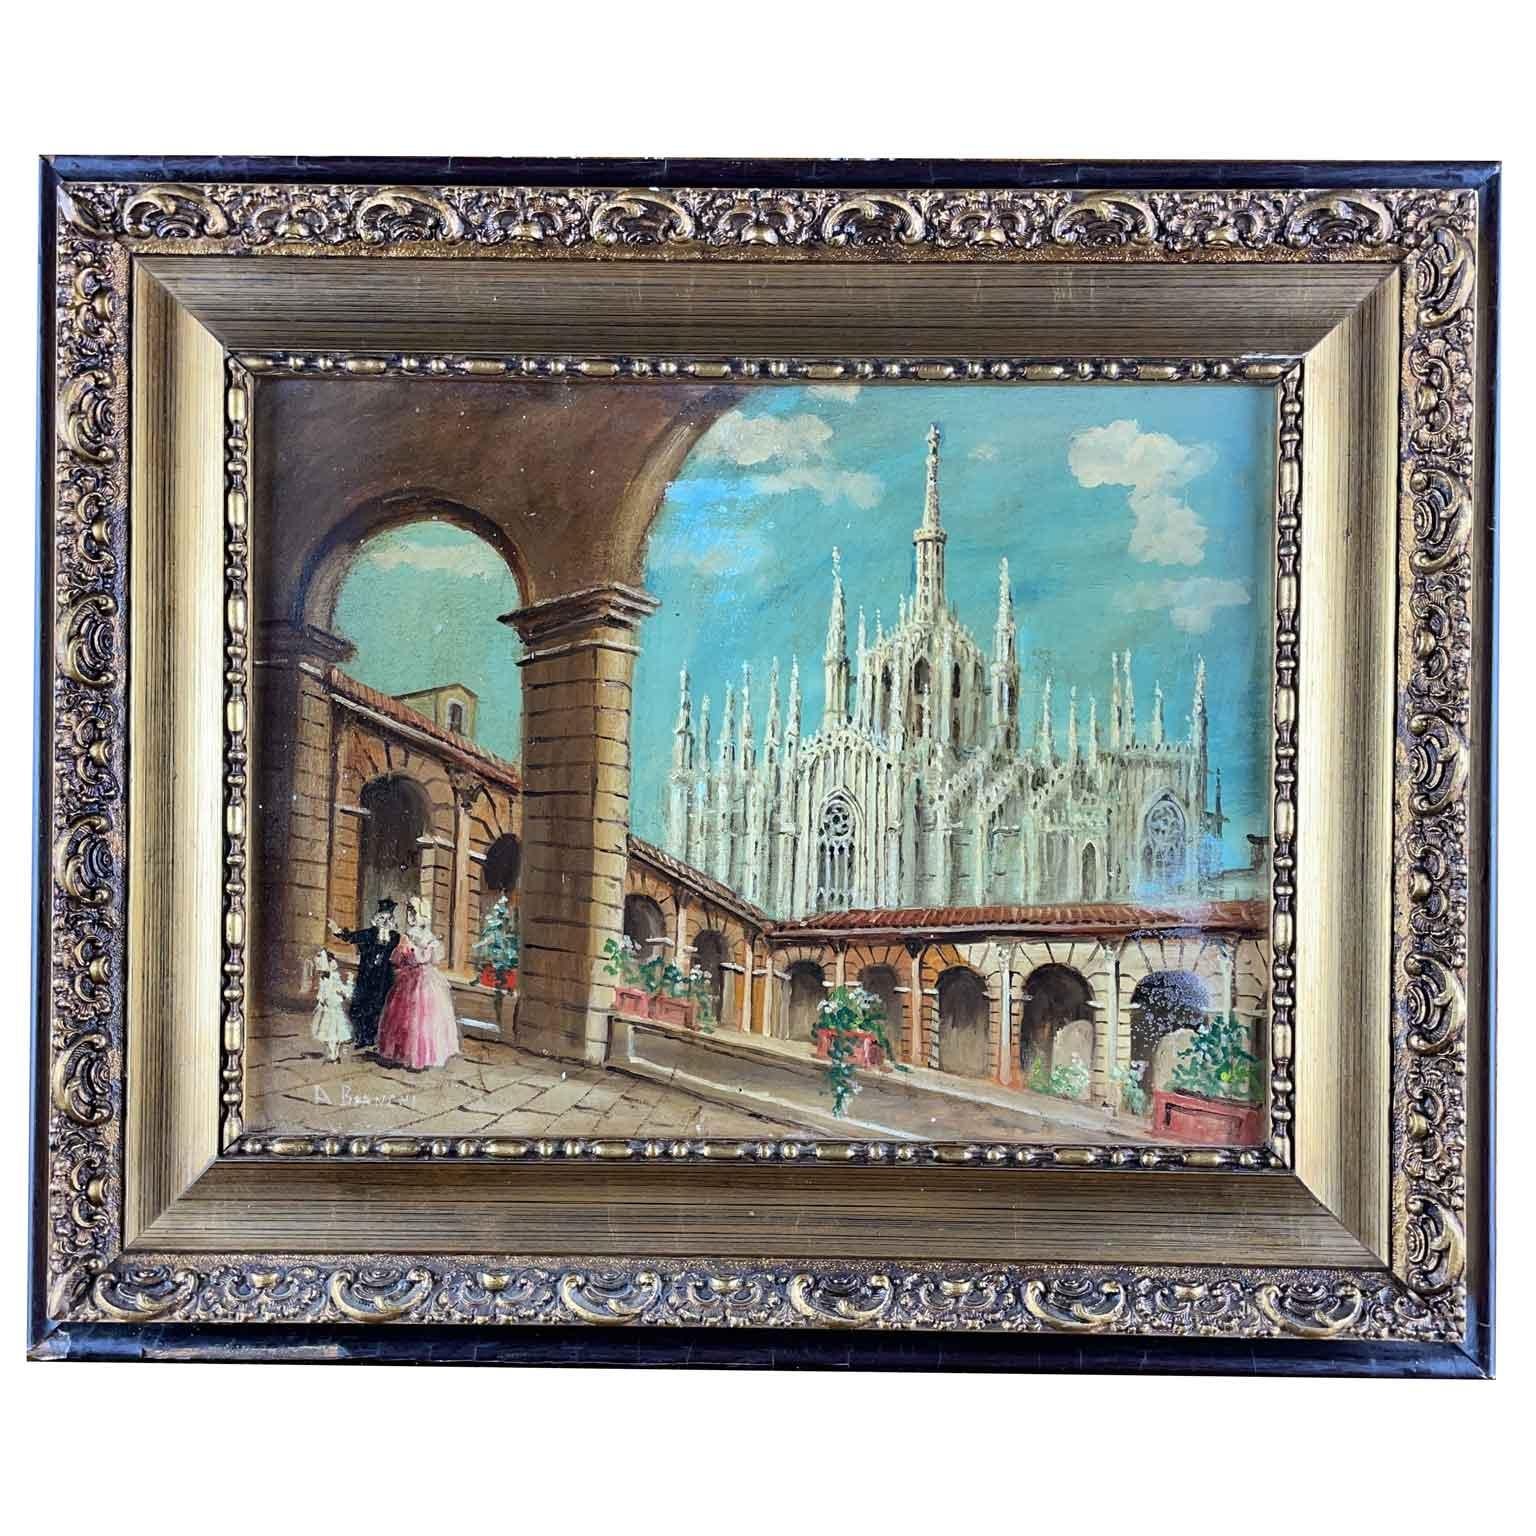 Pair of Italian Milanese Duomo Cathedral views 1950 circa, pair of Italian landscape paintings, oil on poplar plywood panels, both signed A. Bianchi on the right and left in the lower part. Gilt and ebonised frames.

The first depicts the side of